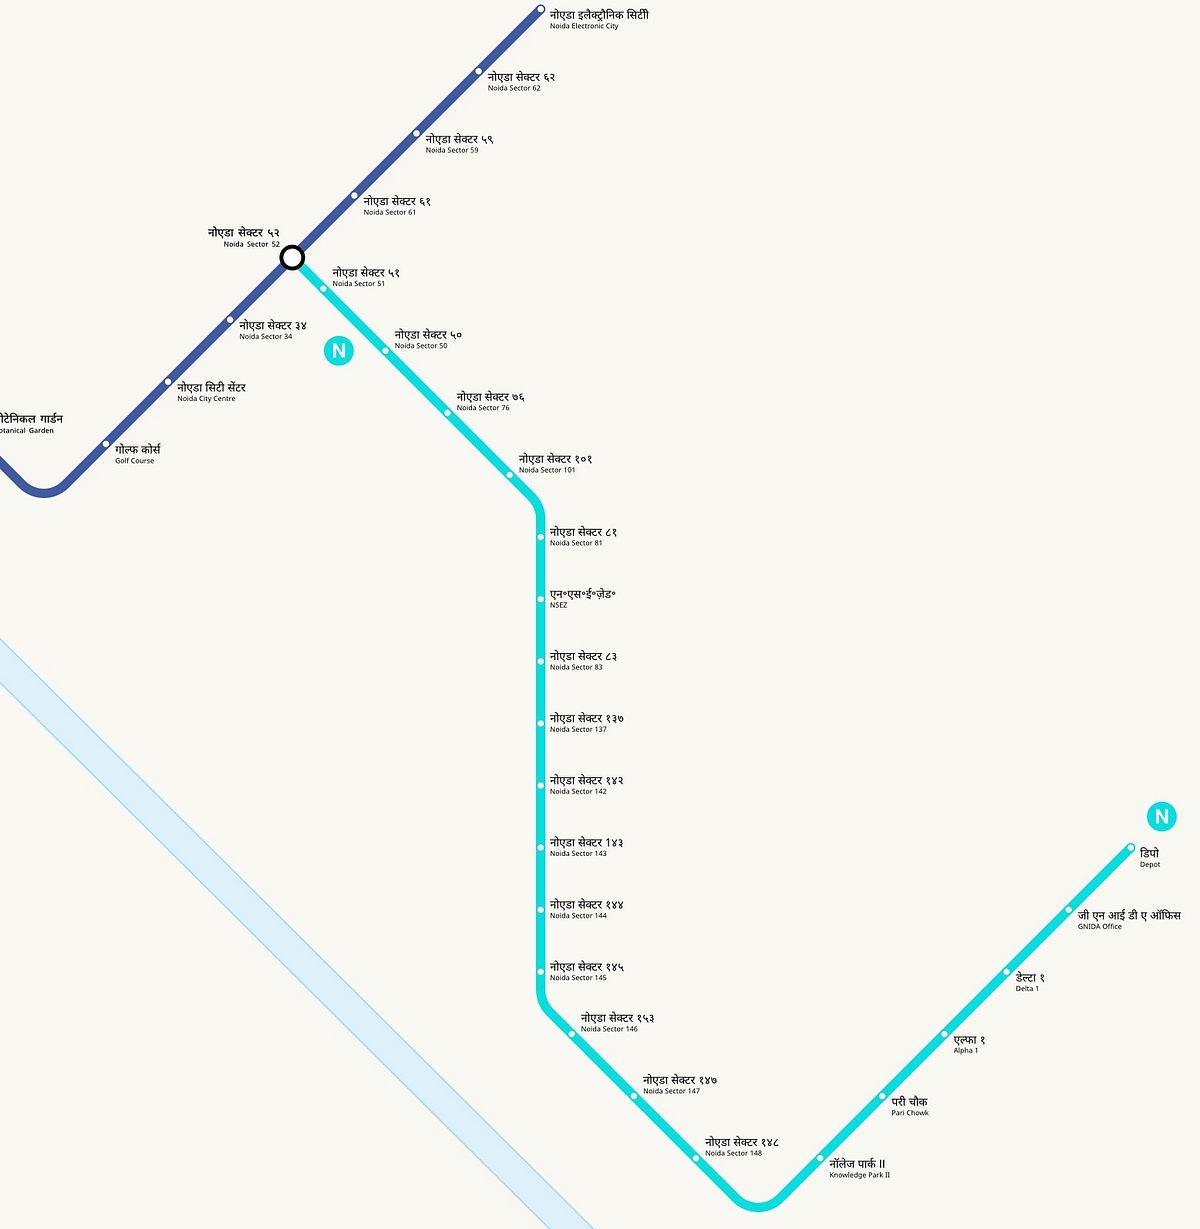 Mapping the Aqua Line. The network starts at Sector 51 in Noida and ends at the Depot Station in Greater Noida. The Blue Line extends to Noida Electronic City, starting from Dwarka (near the Delhi airport).&nbsp;